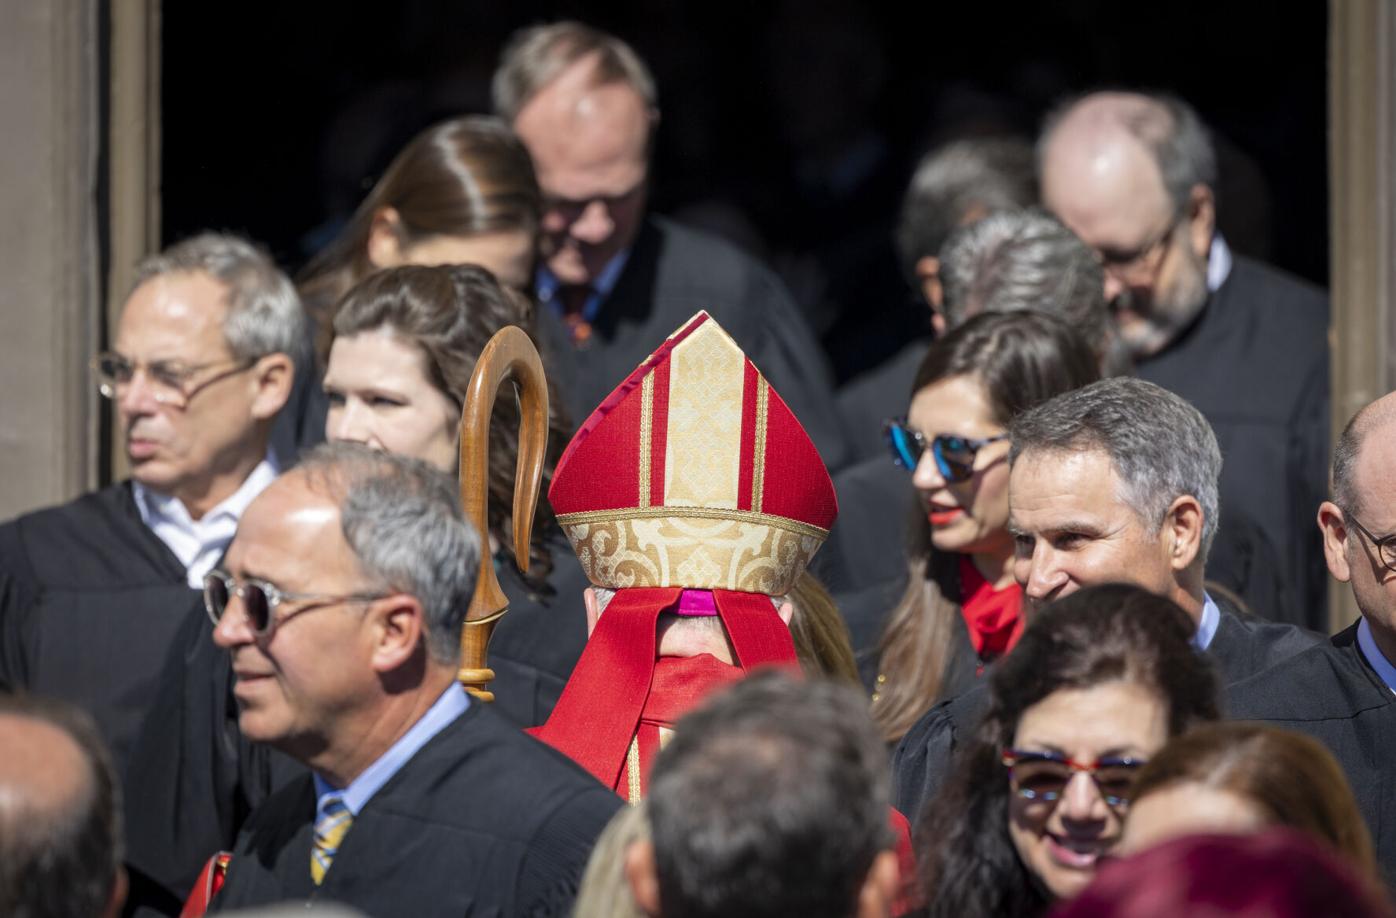 Louisiana judges gather to observe 71st annual Red Mass